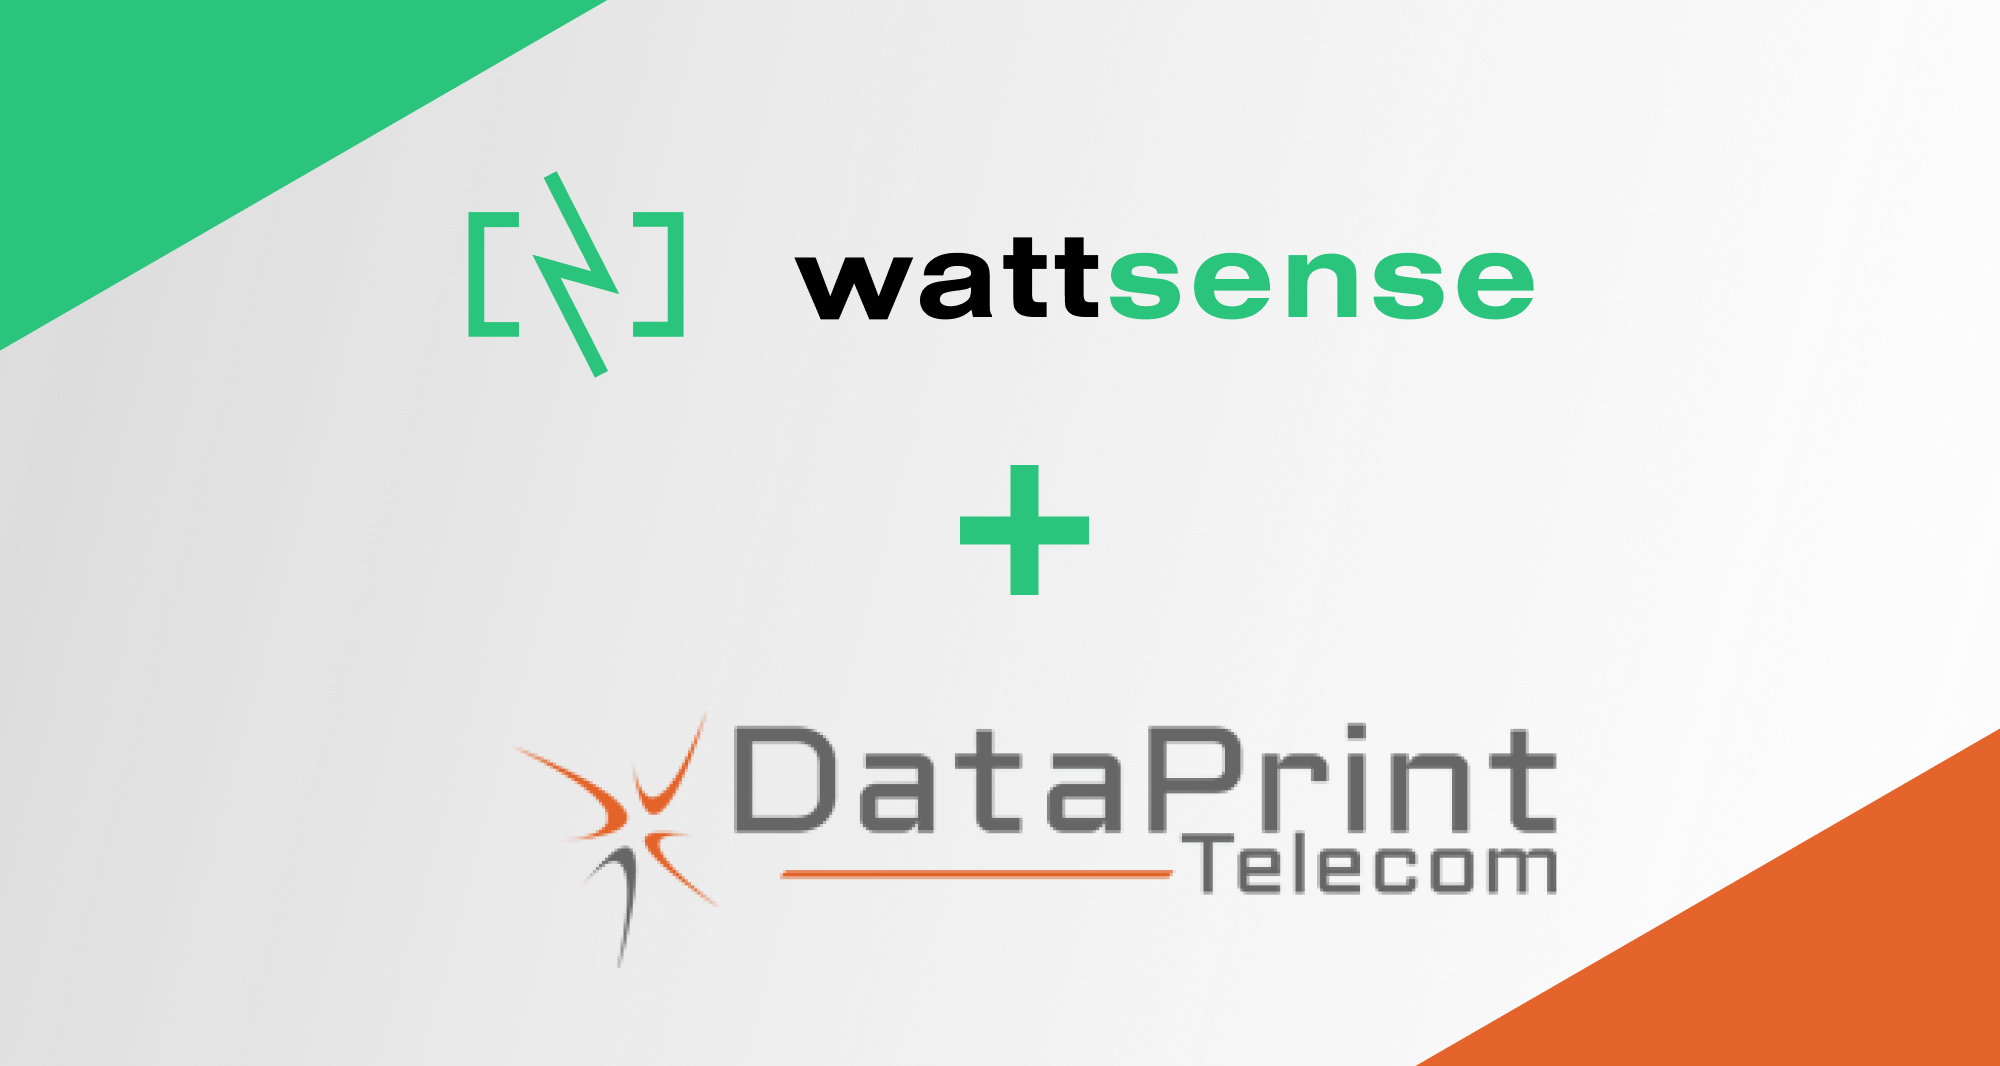 DataPrint strengthens its offering for Smart Buildings by adding Wattsense to its catalog